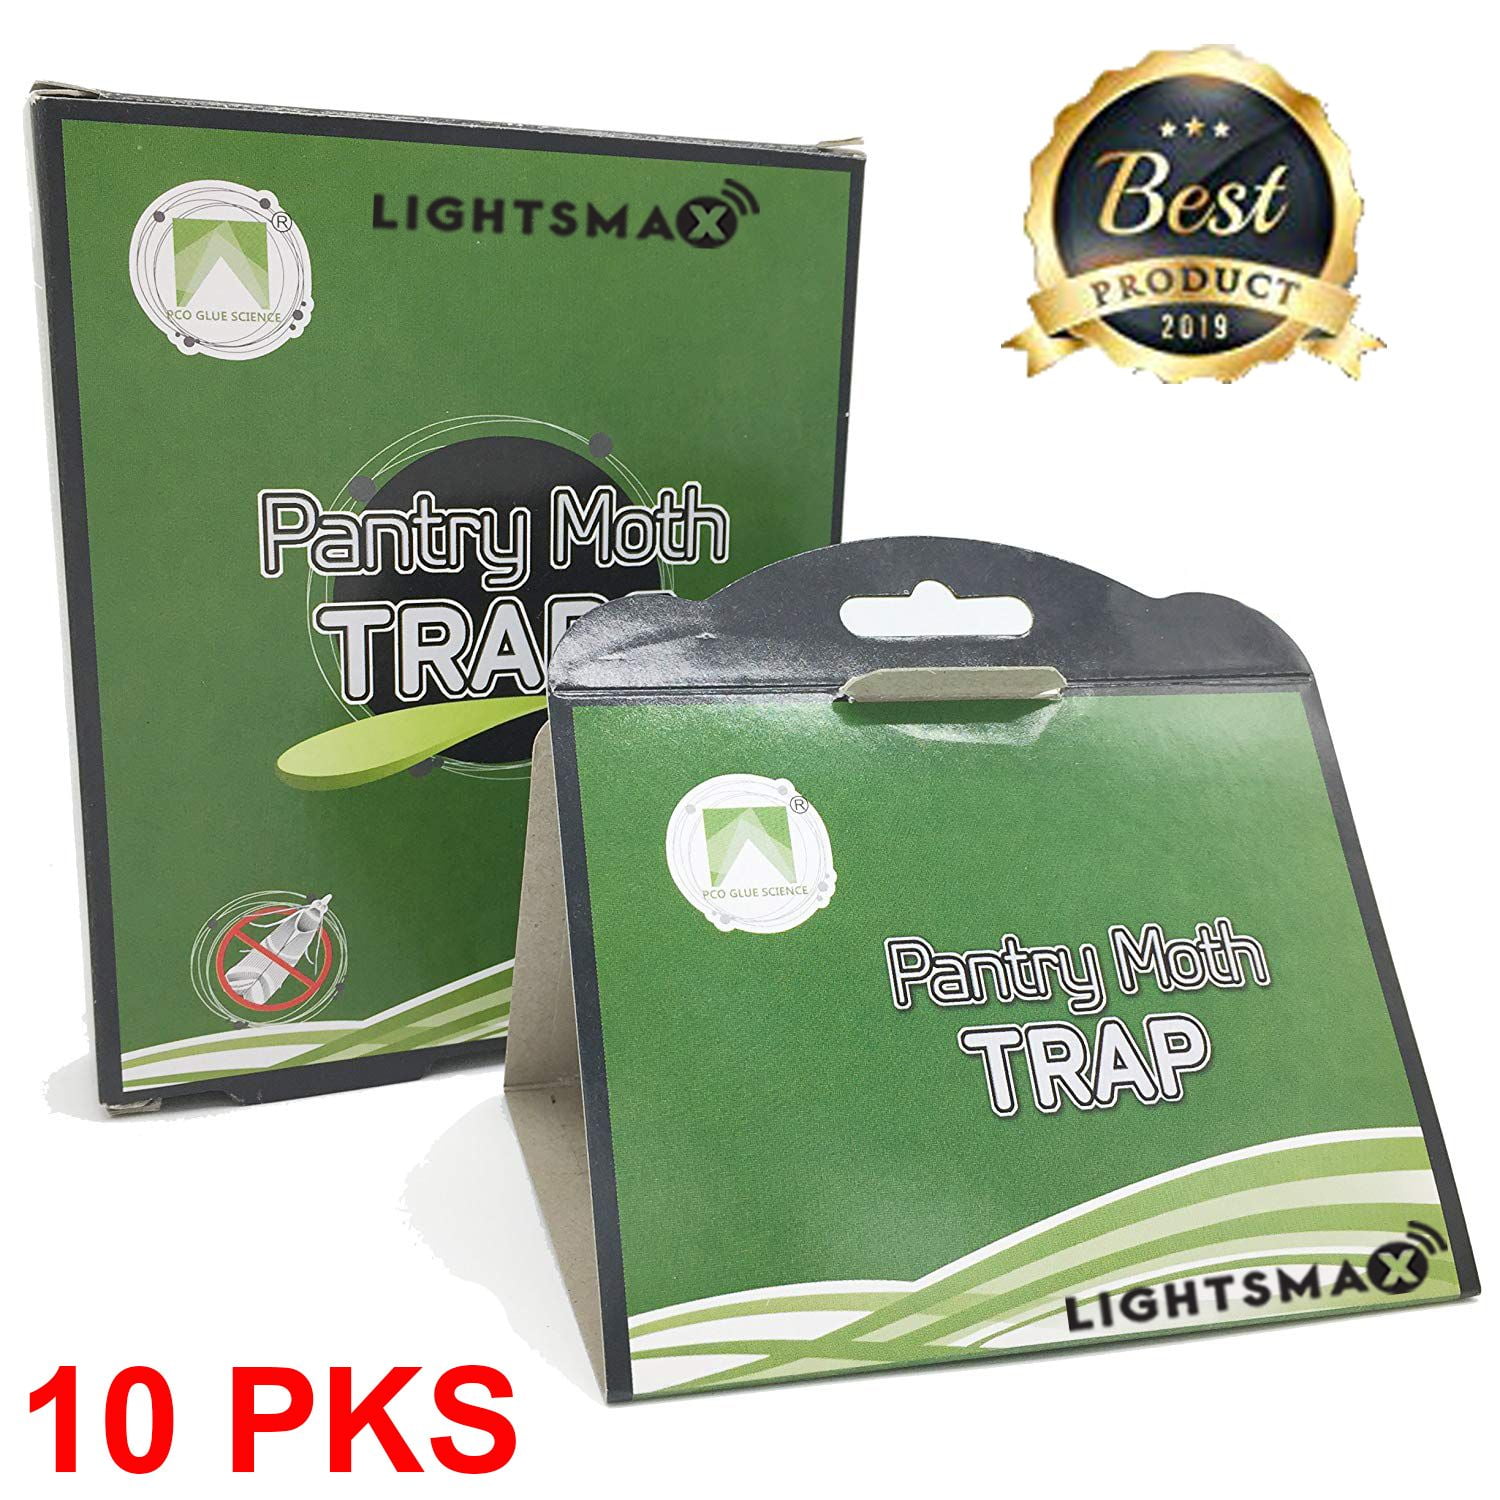 MothReaper Pantry Moth Traps for House Pantry, Non-Toxic Pantry Moth Trap for Food and Cupboard Moths, Pantry Moth Trap, Pantry Moth Traps with